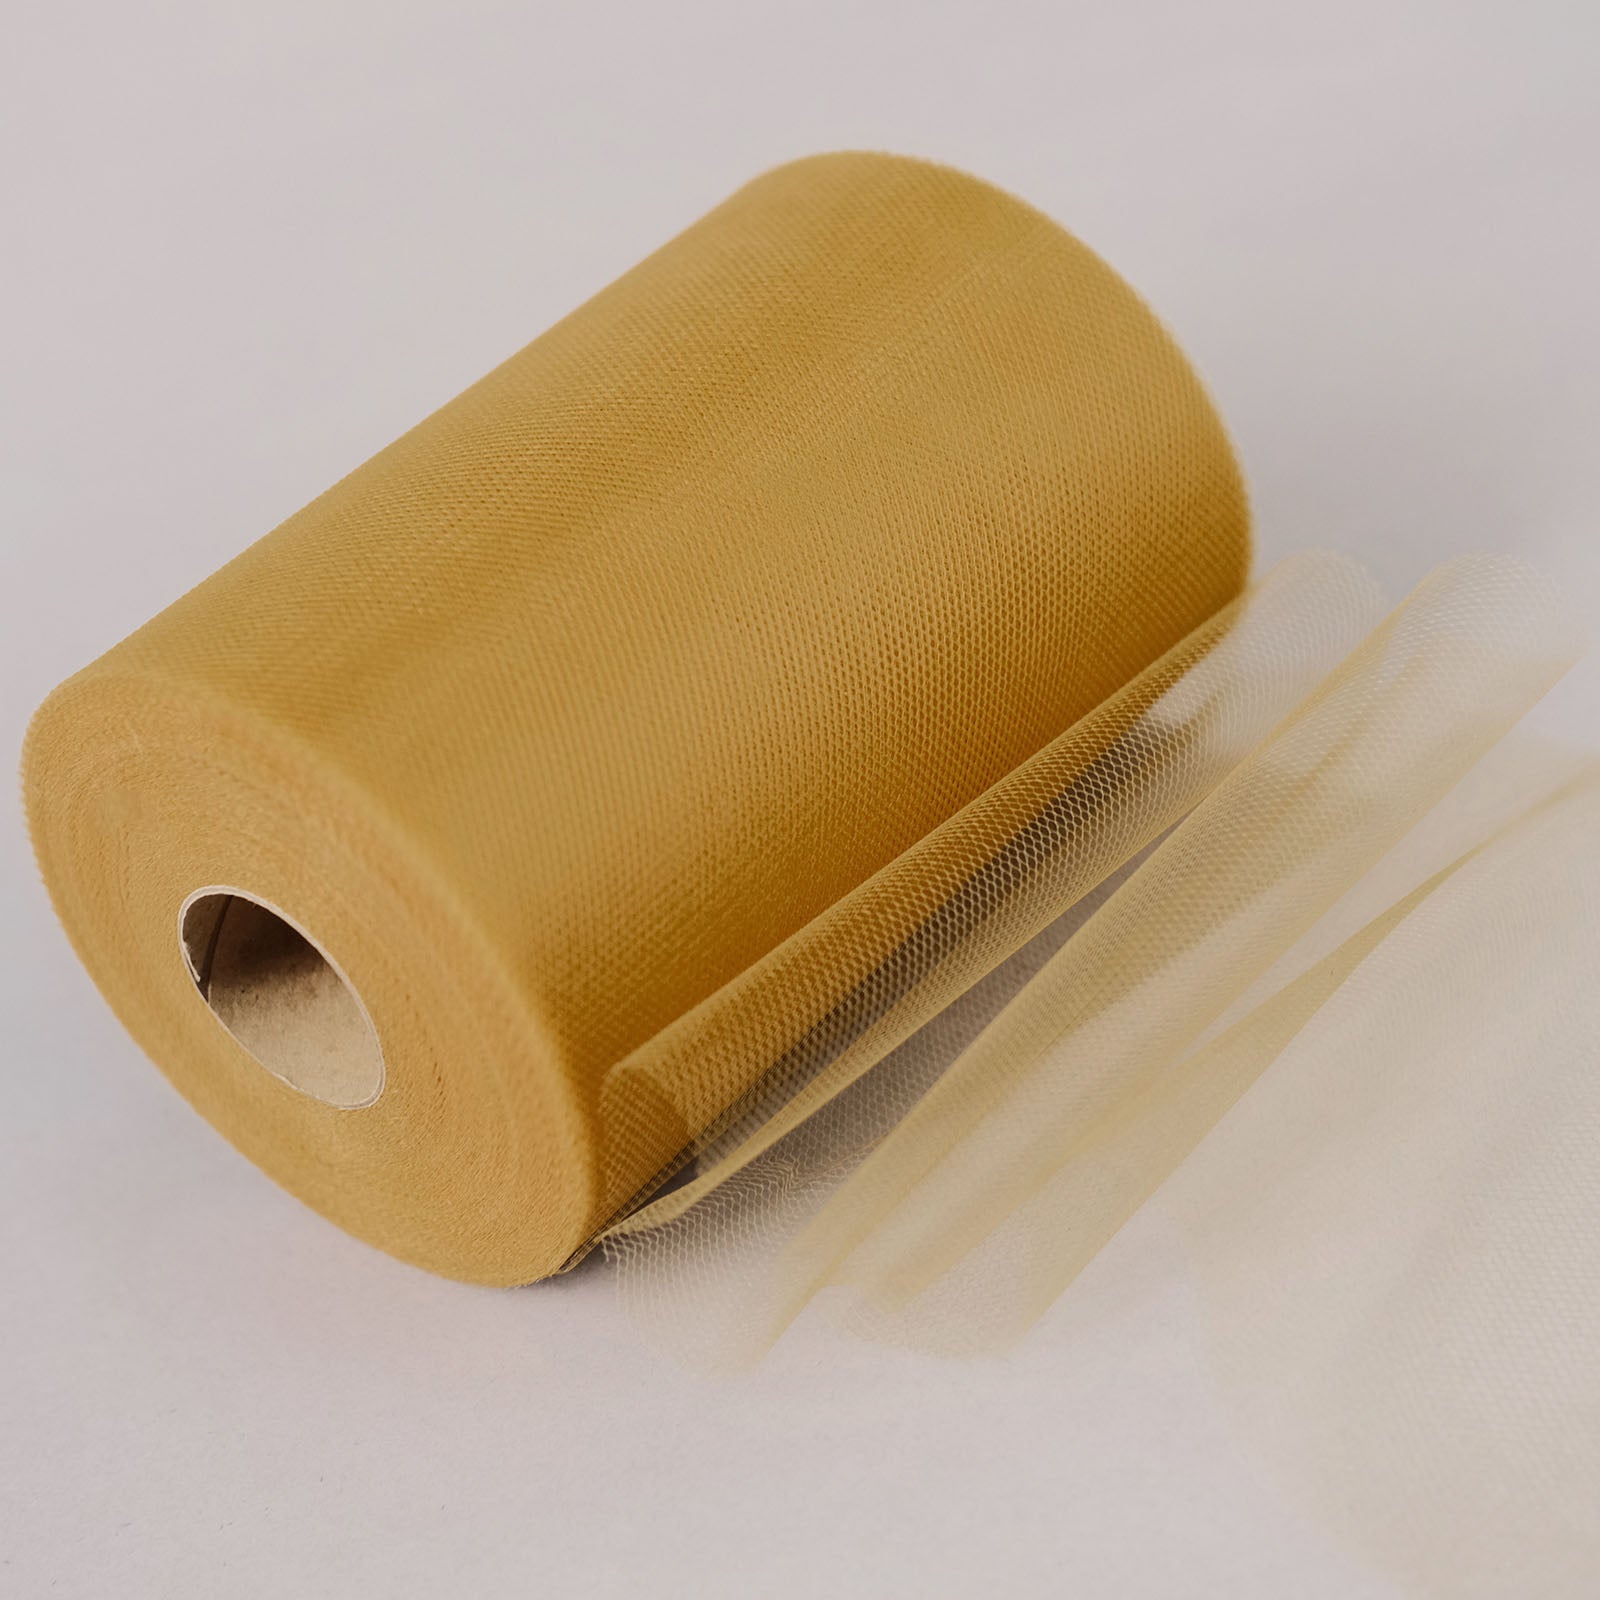 https://tableclothsfactory.com/cdn/shop/products/6-100-Yards-Gold-Tulle-Fabric-Bolt-Sheer-Fabric-Spool-Roll-For-Crafts.jpg?v=1689407064